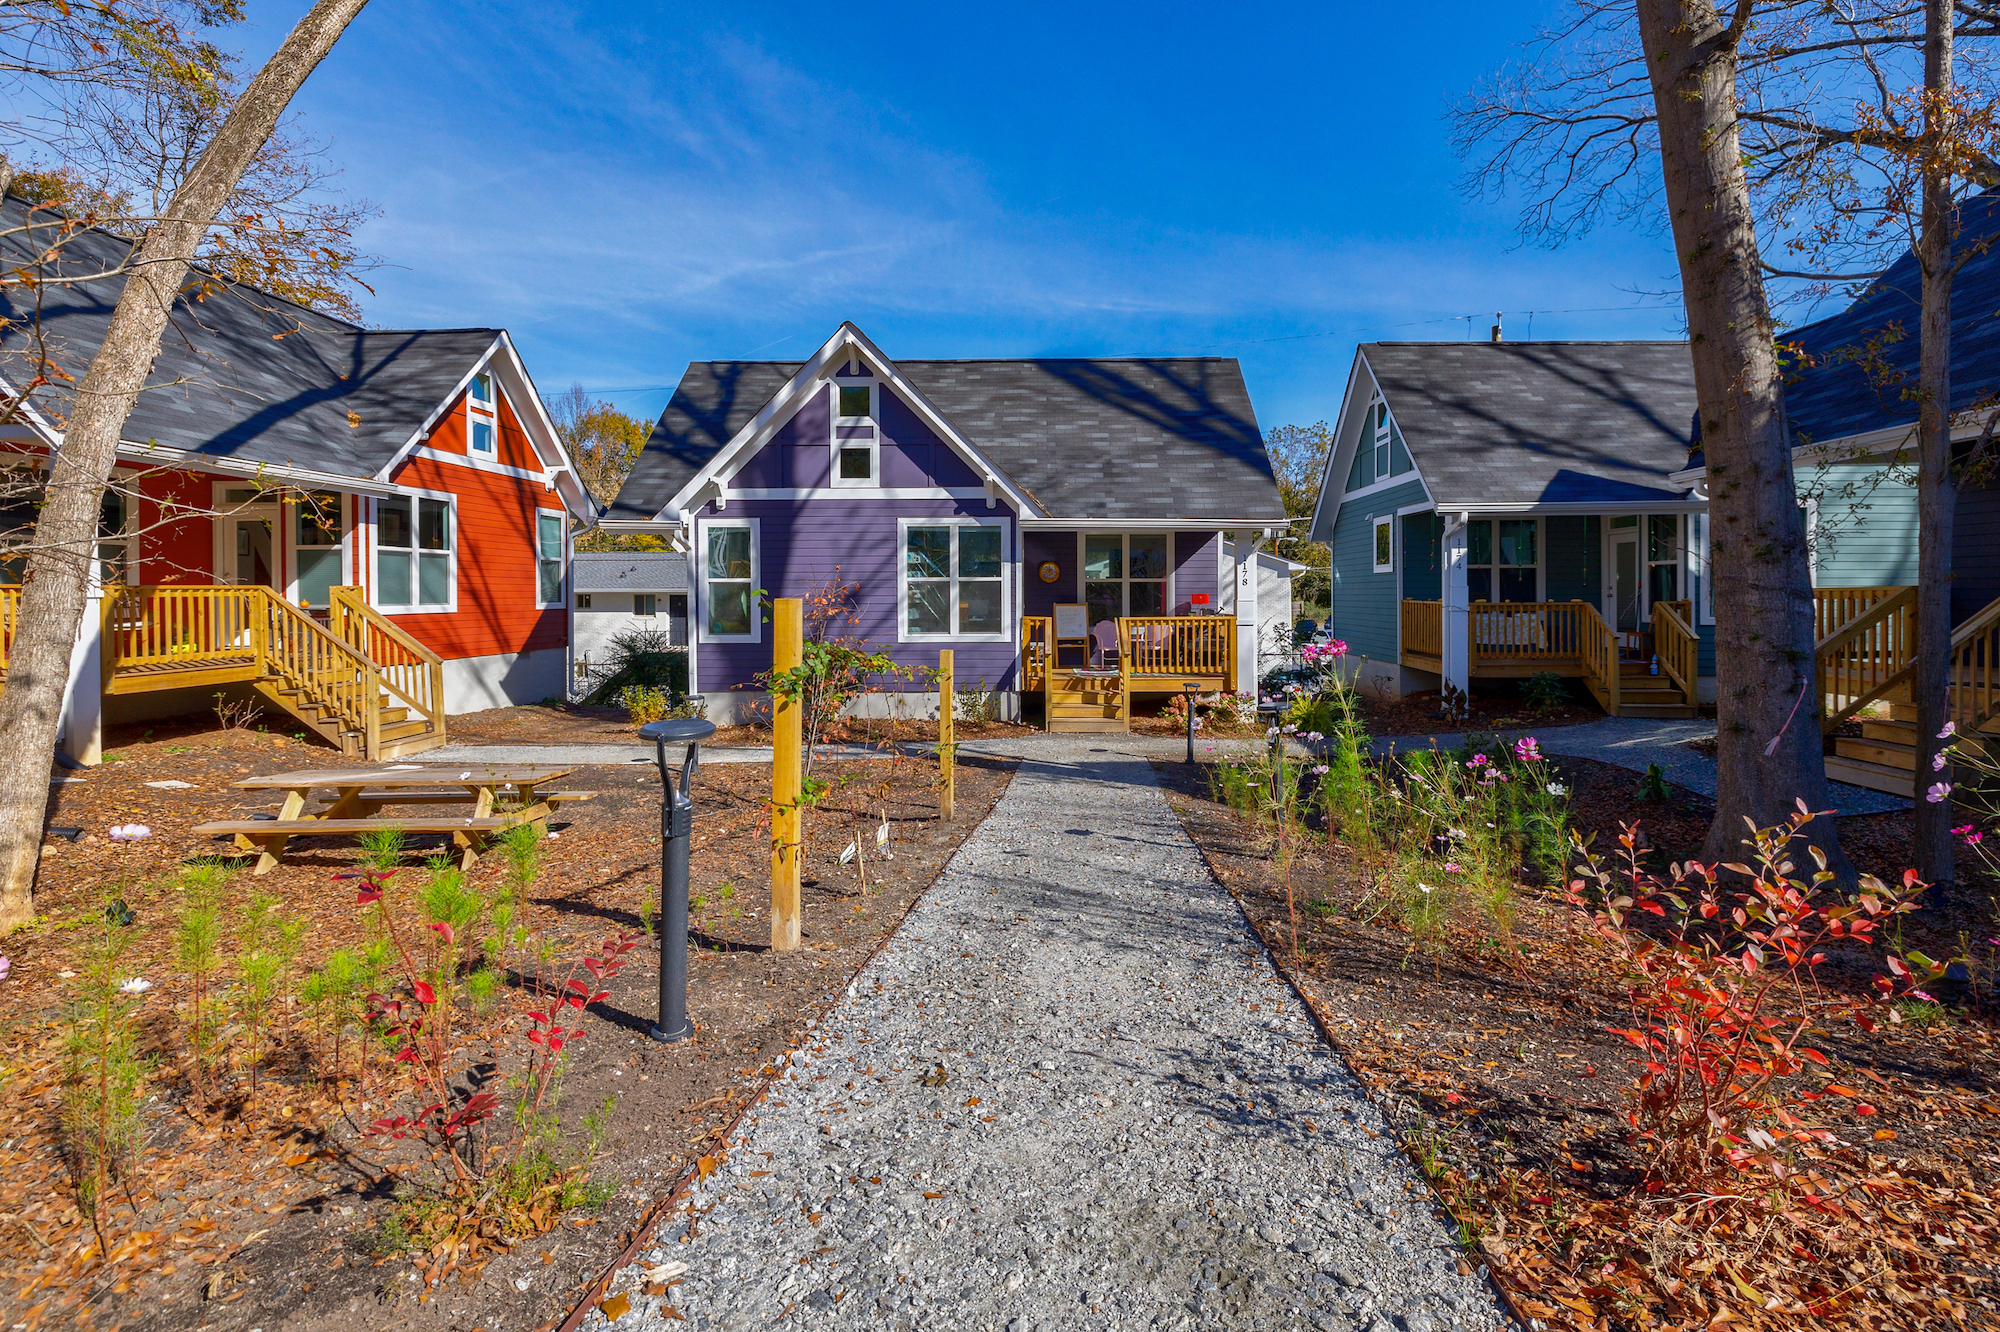 Cottages on Vaughan community of tiny homes